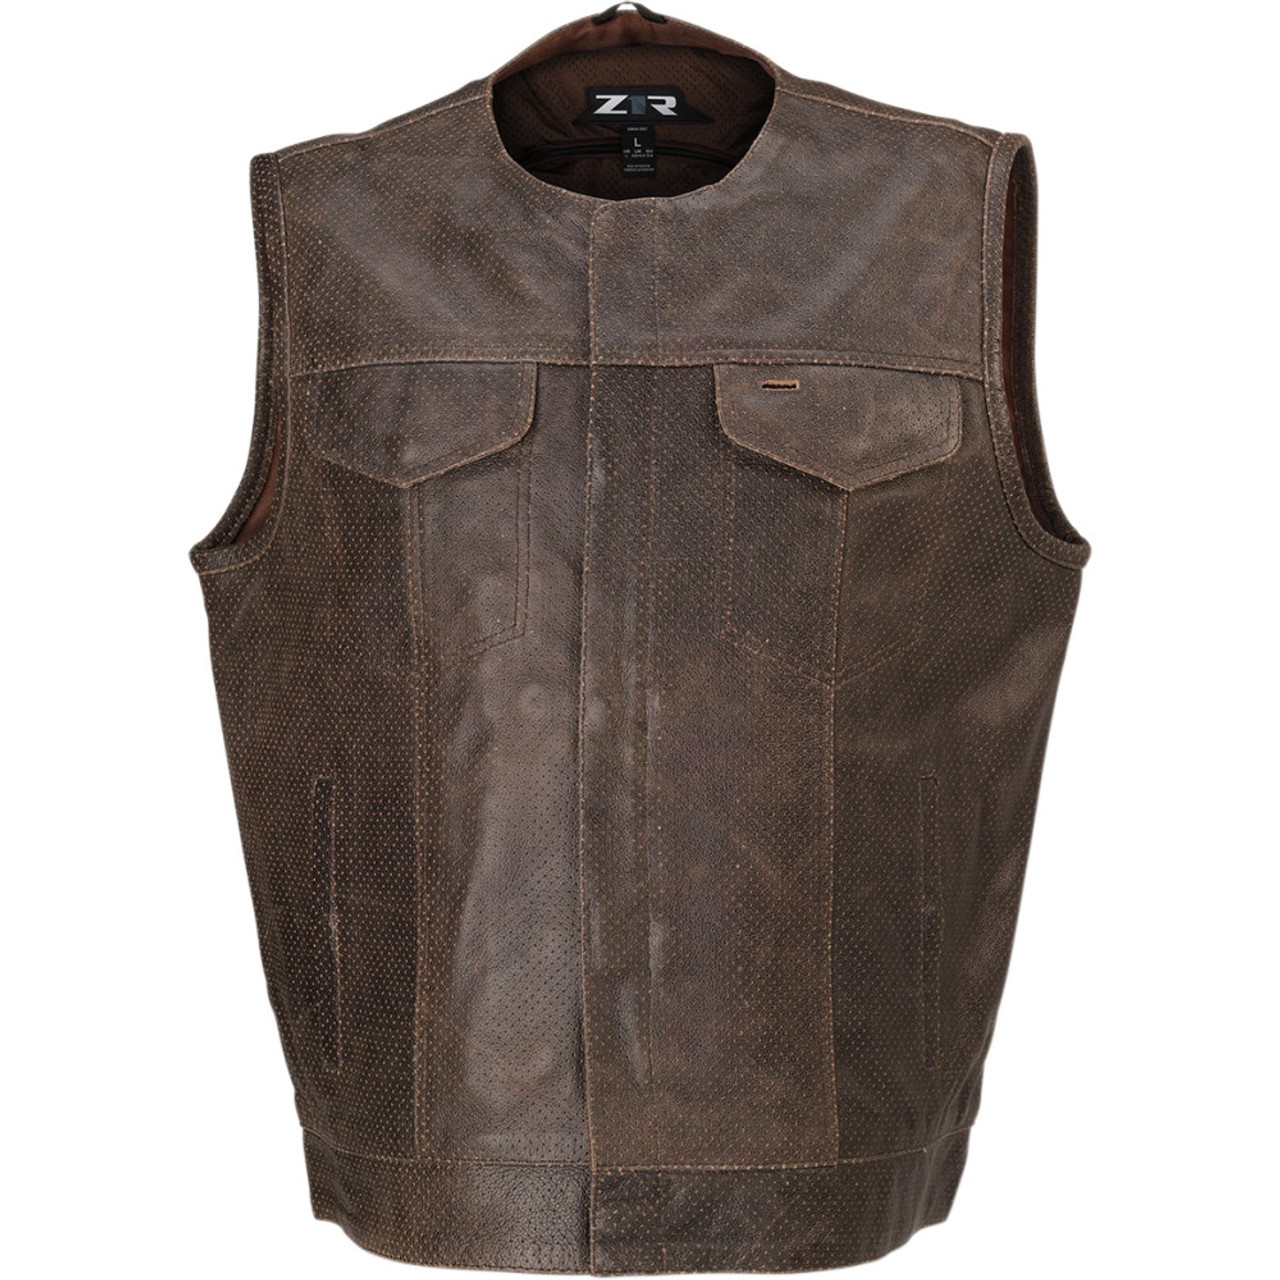 Z1R Ganja Brown Perforated Leather Motorcycle Vest - Get Lowered Cycles